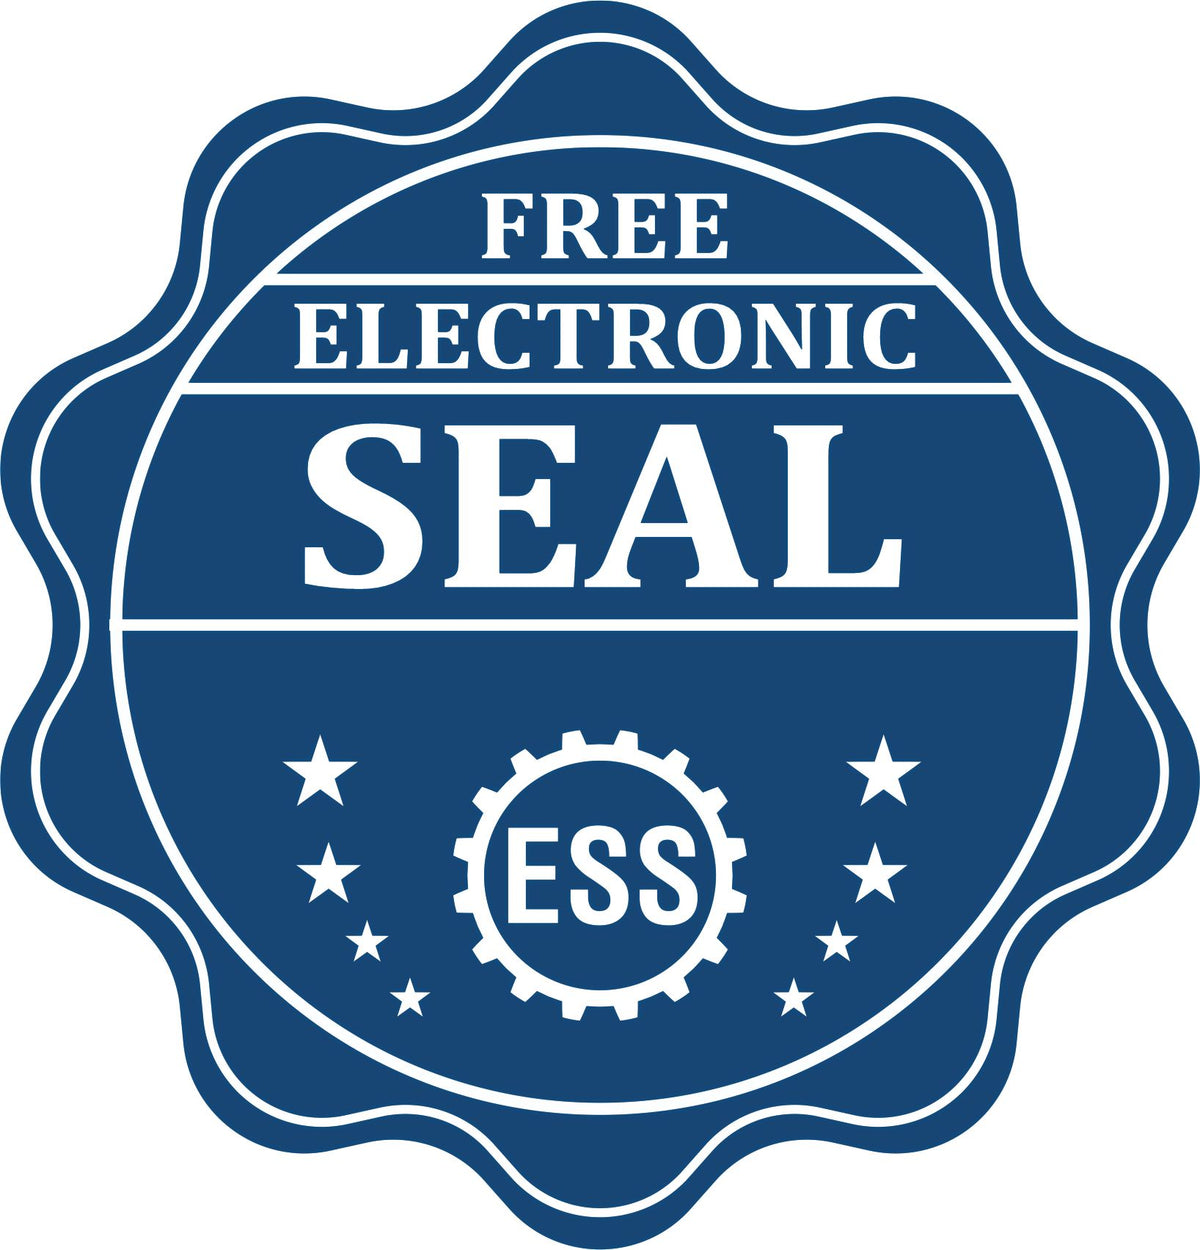 A badge showing a free electronic seal for the State of Texas Extended Long Reach Engineer Seal with stars and the ESS gear on the emblem.